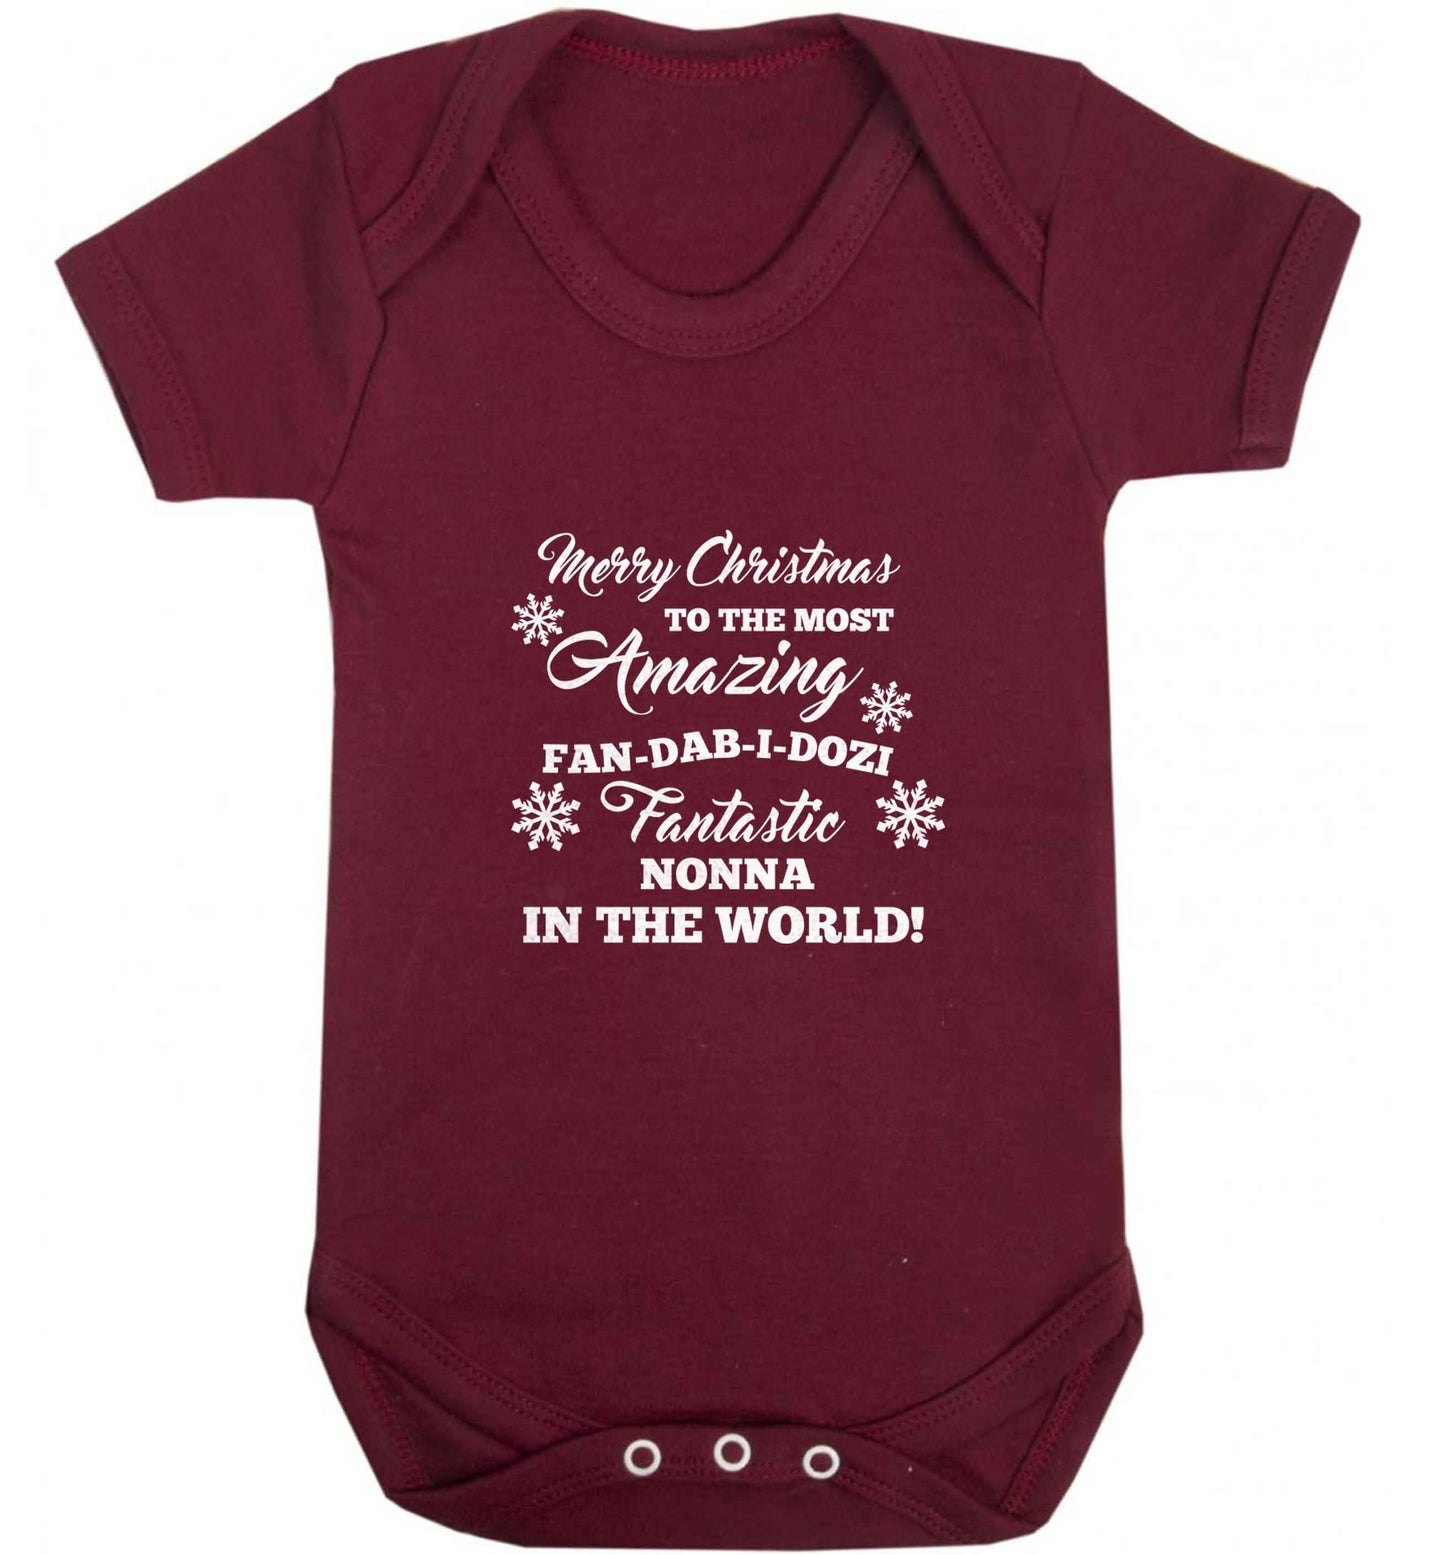 Merry Christmas to the most amazing fan-dab-i-dozi fantasic Nonna in the world baby vest maroon 18-24 months